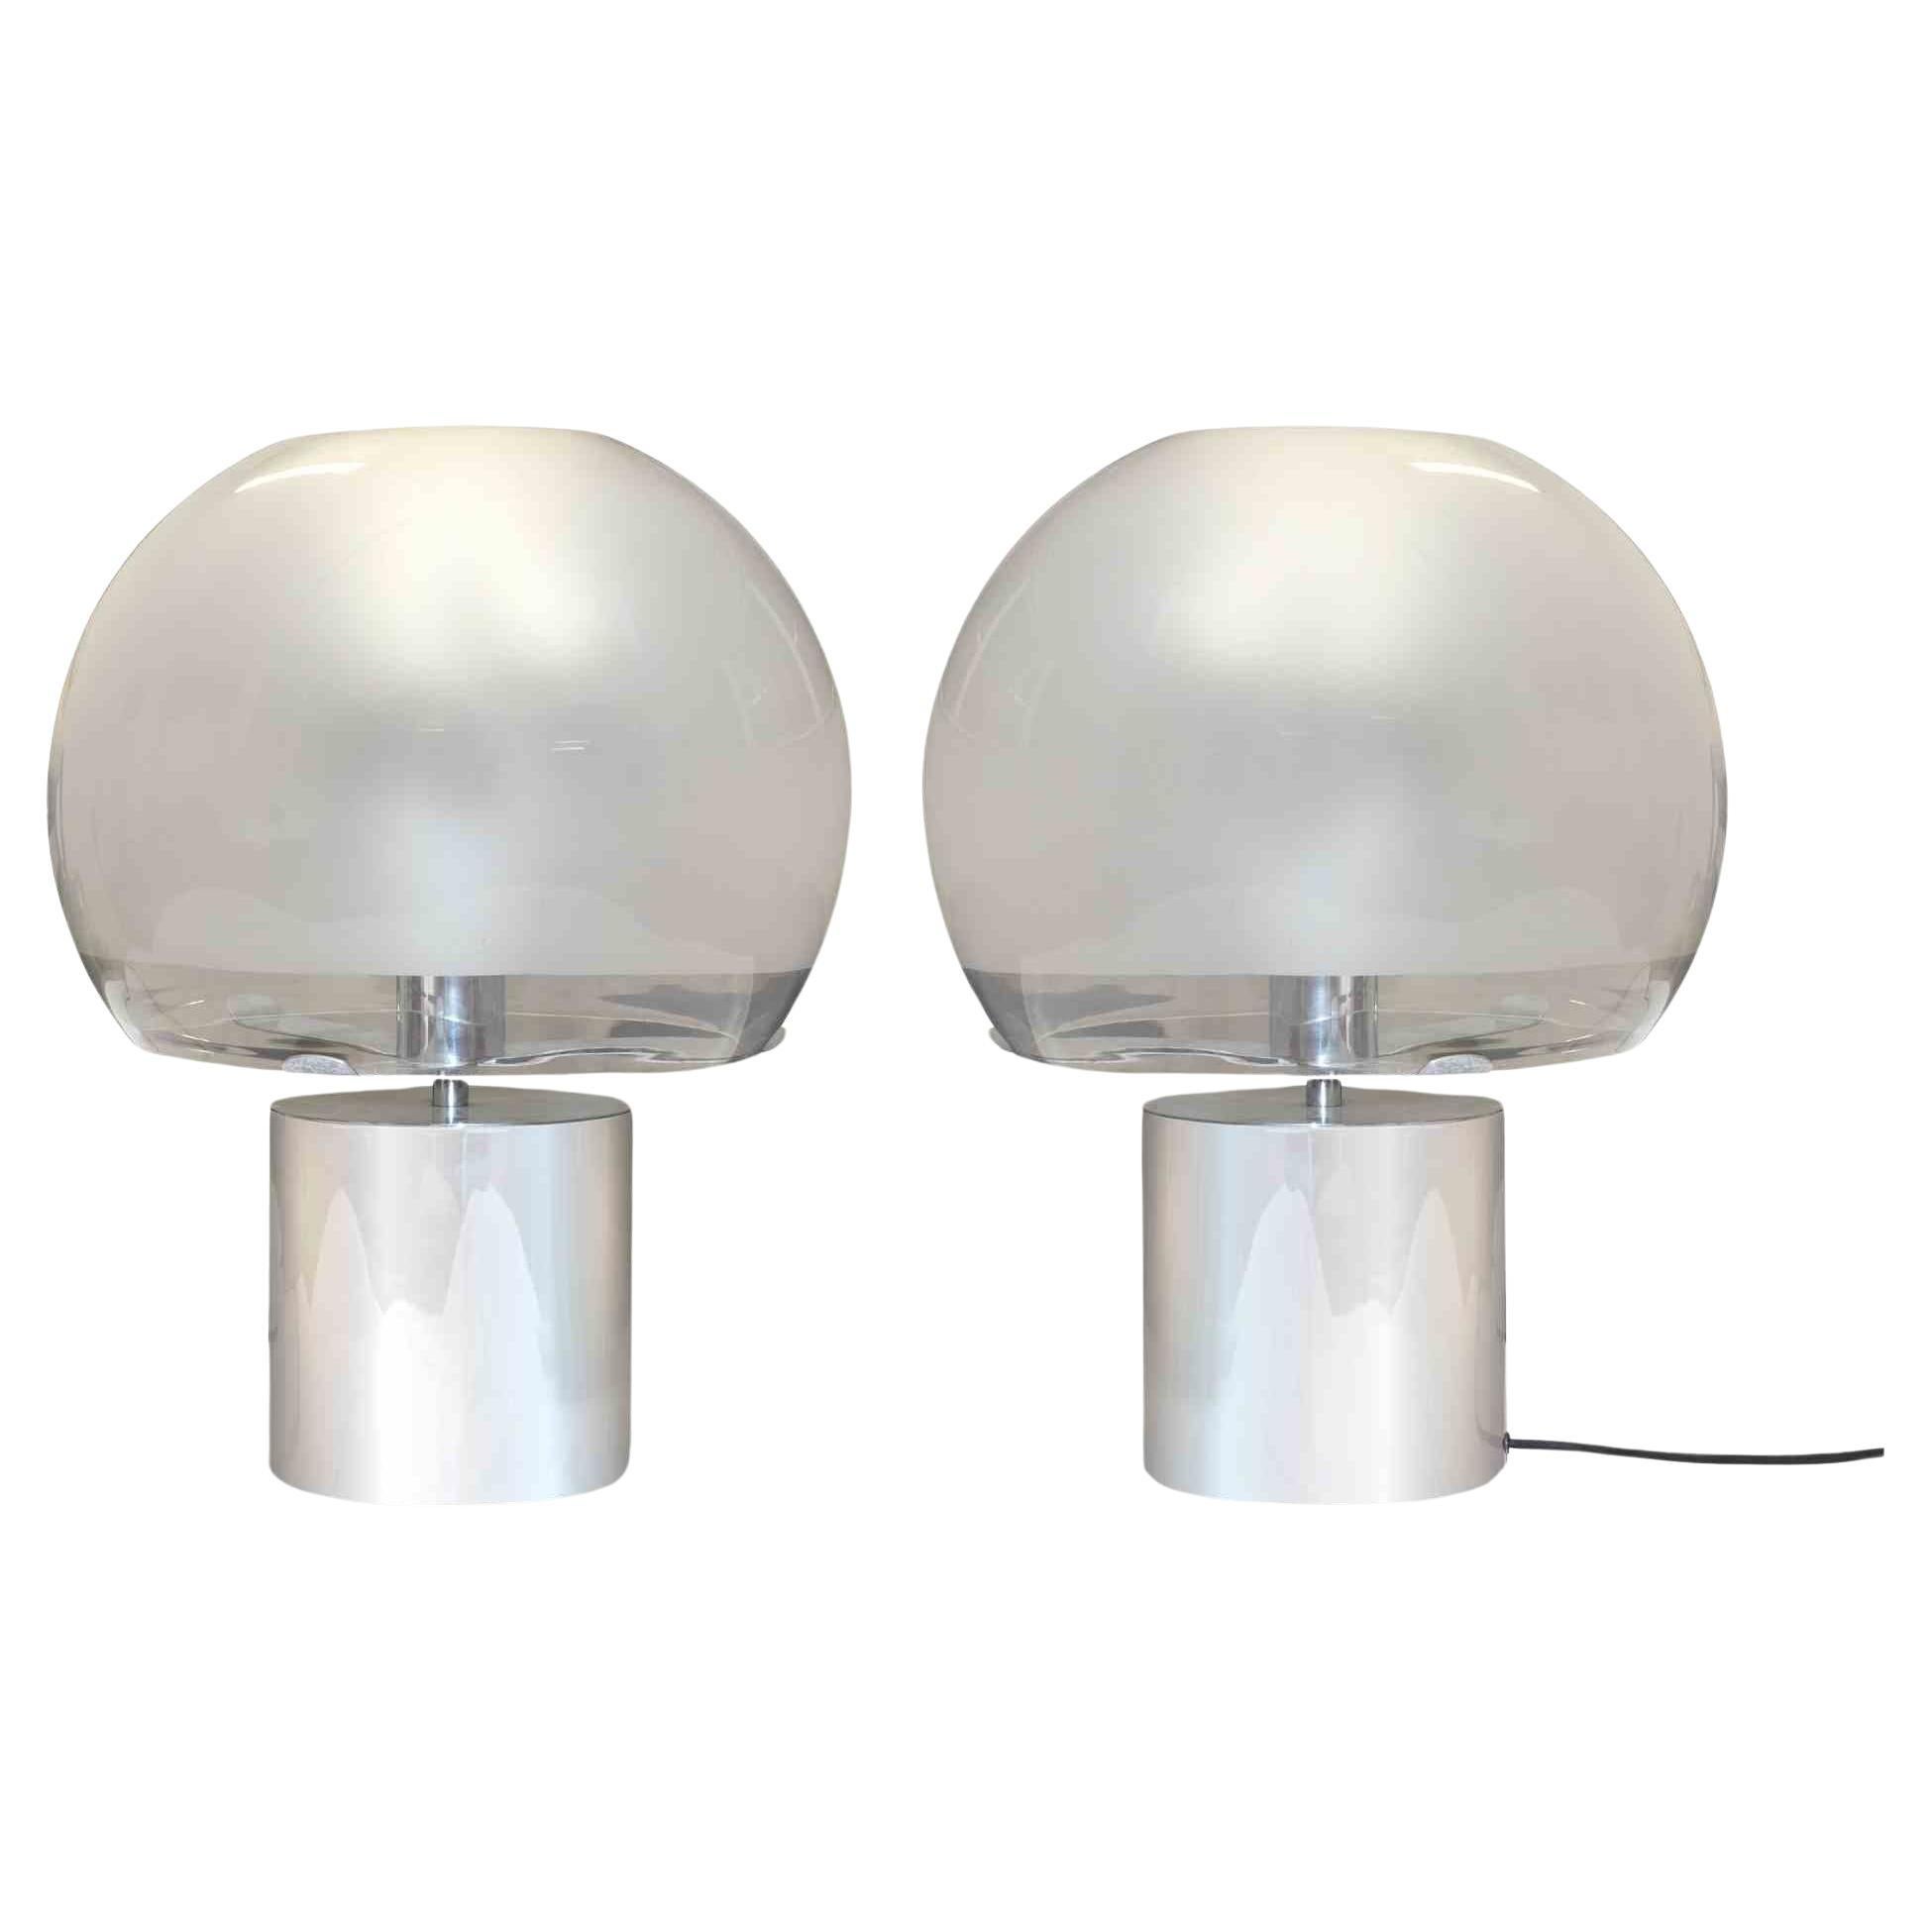 Pair of Porcino Table Lamp by Luigi Caccia Dominioni for Azucena, Italy, 1966 For Sale